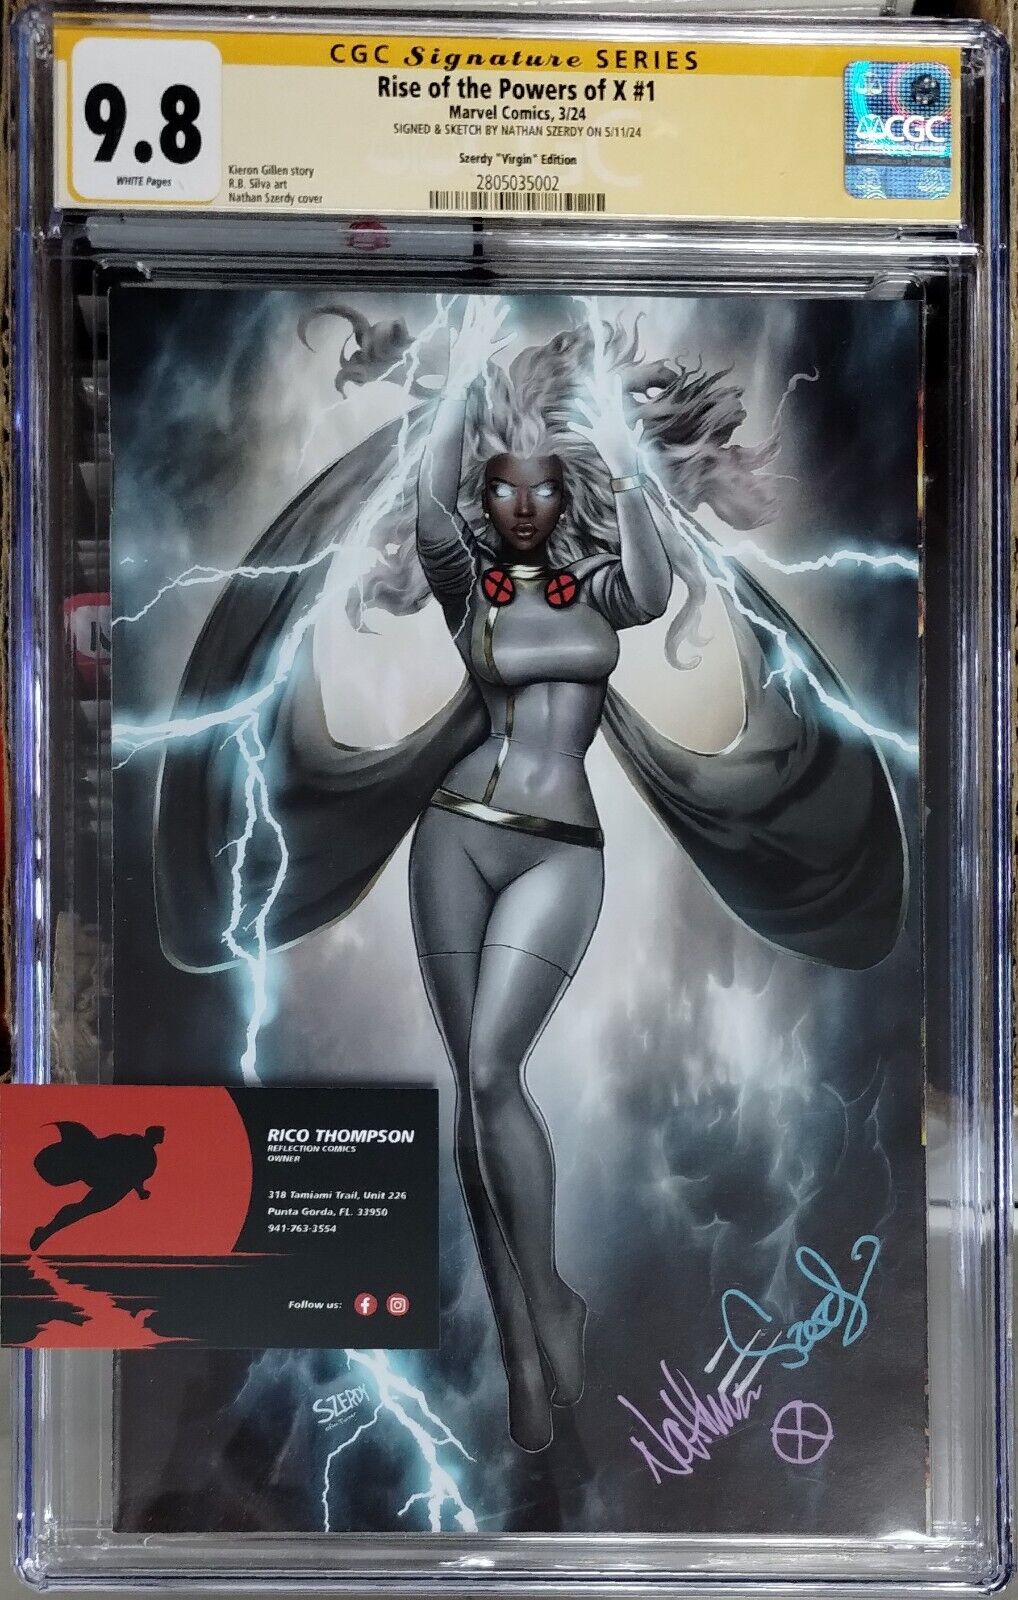 🔥 FLASH SALE 🔥RISE OF THE POWERS OF X #1 CGC SS 9.8 ✍️ SZERDY SIGNED+SKETCHED